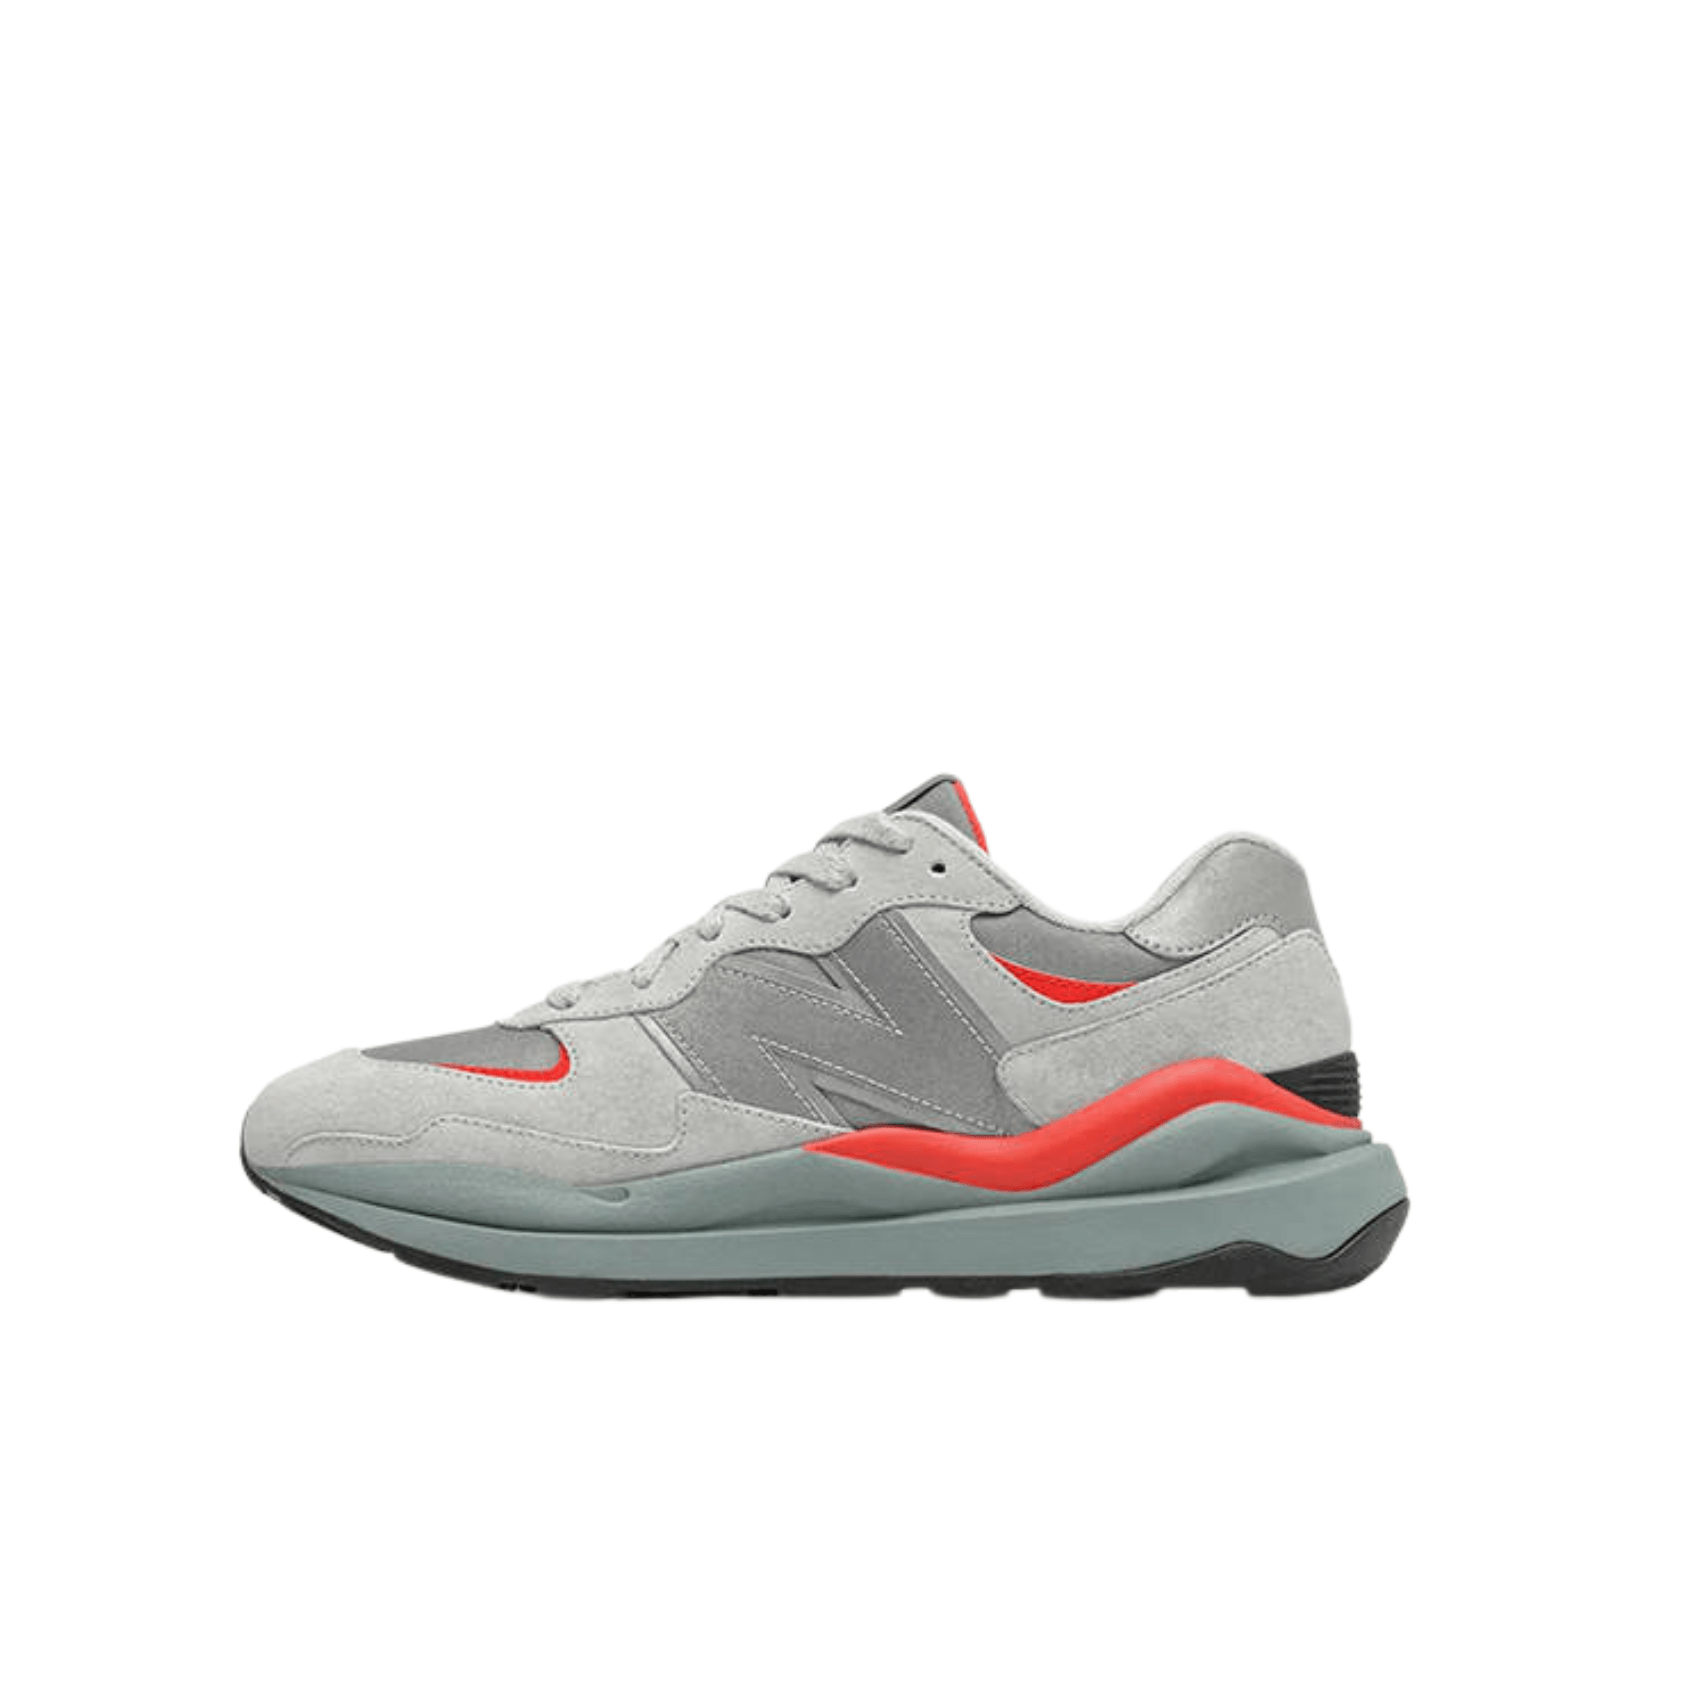 M5740RC1 - Grey/Red